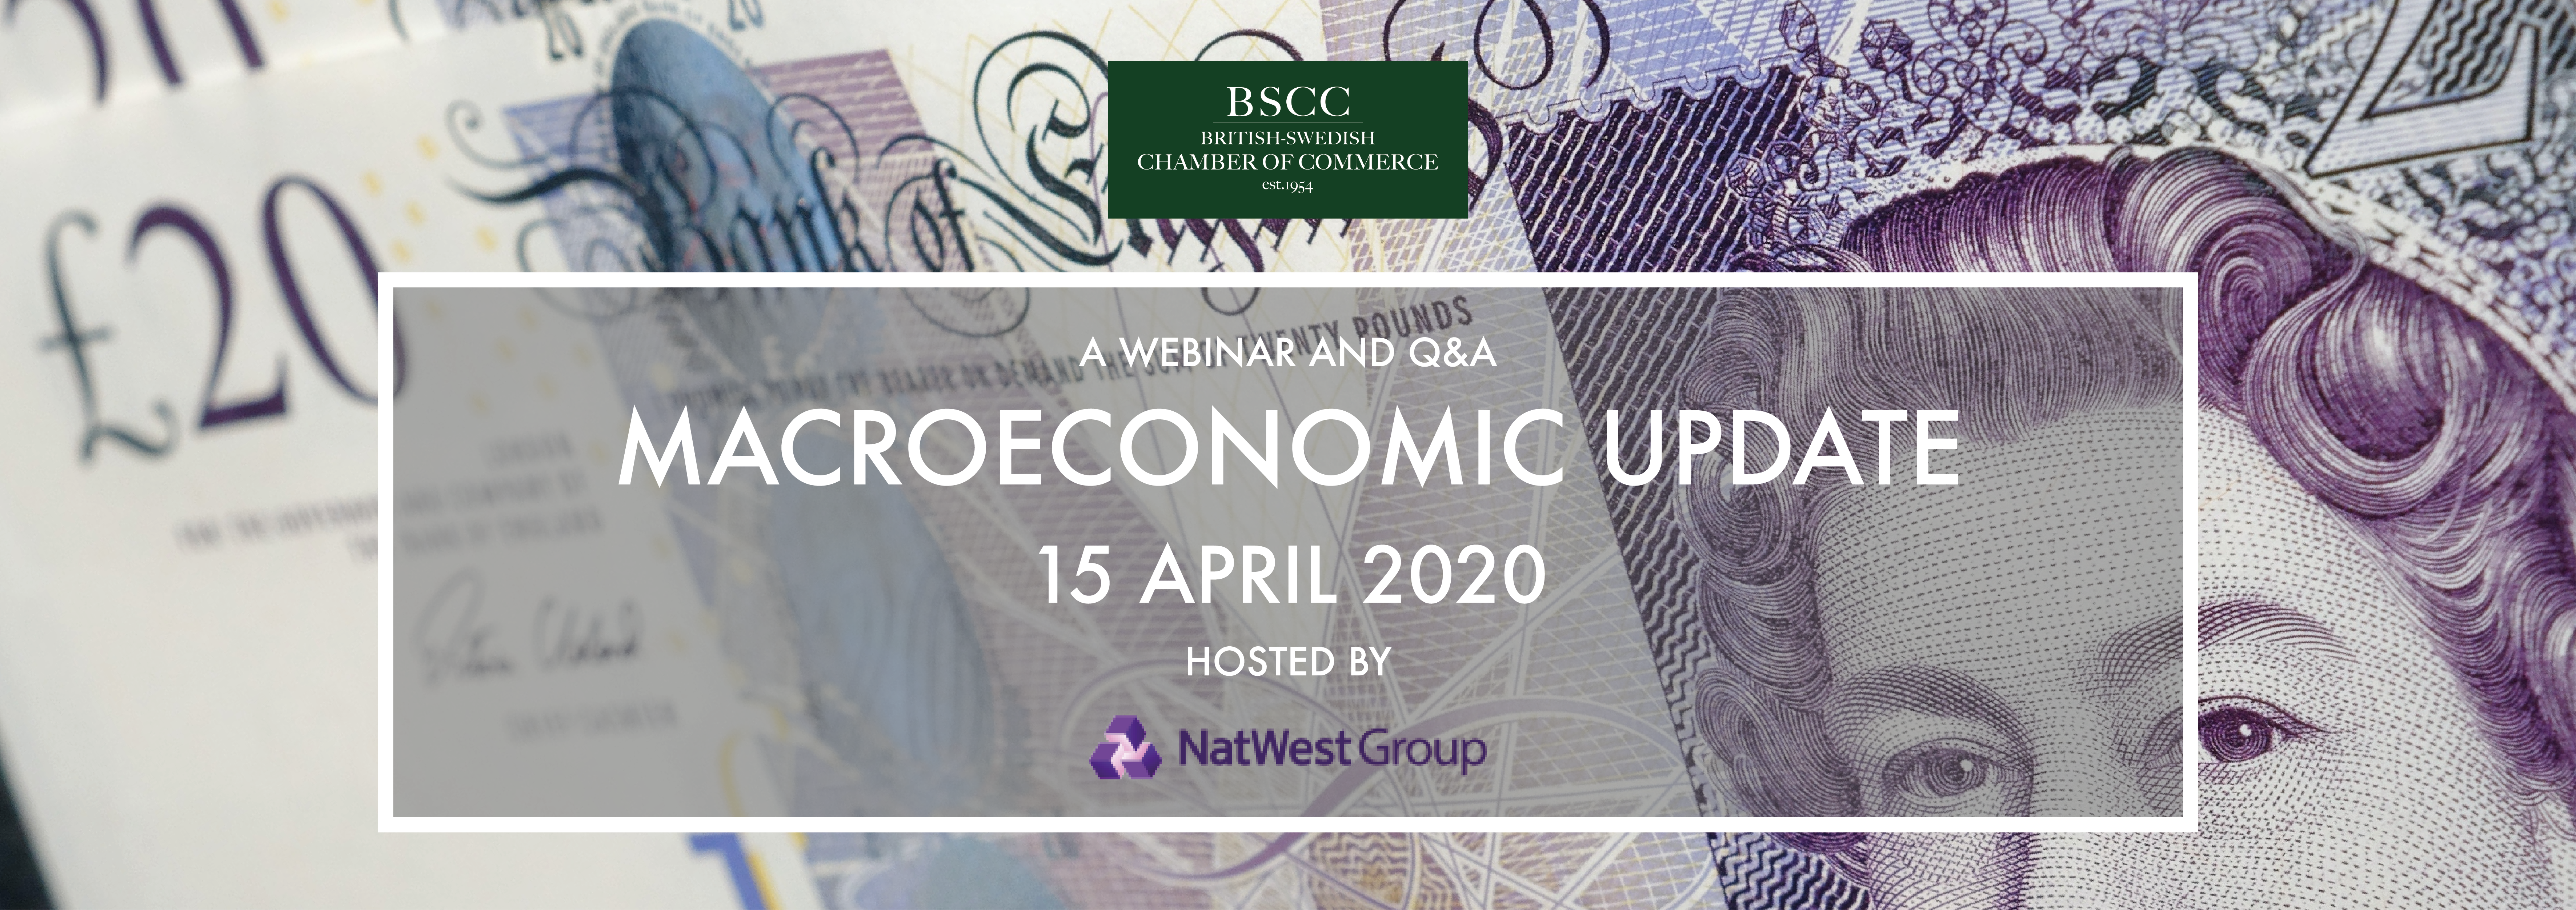 Macroeconomic Update Part 2 By Nick Mannion At Natwest Group Bscc